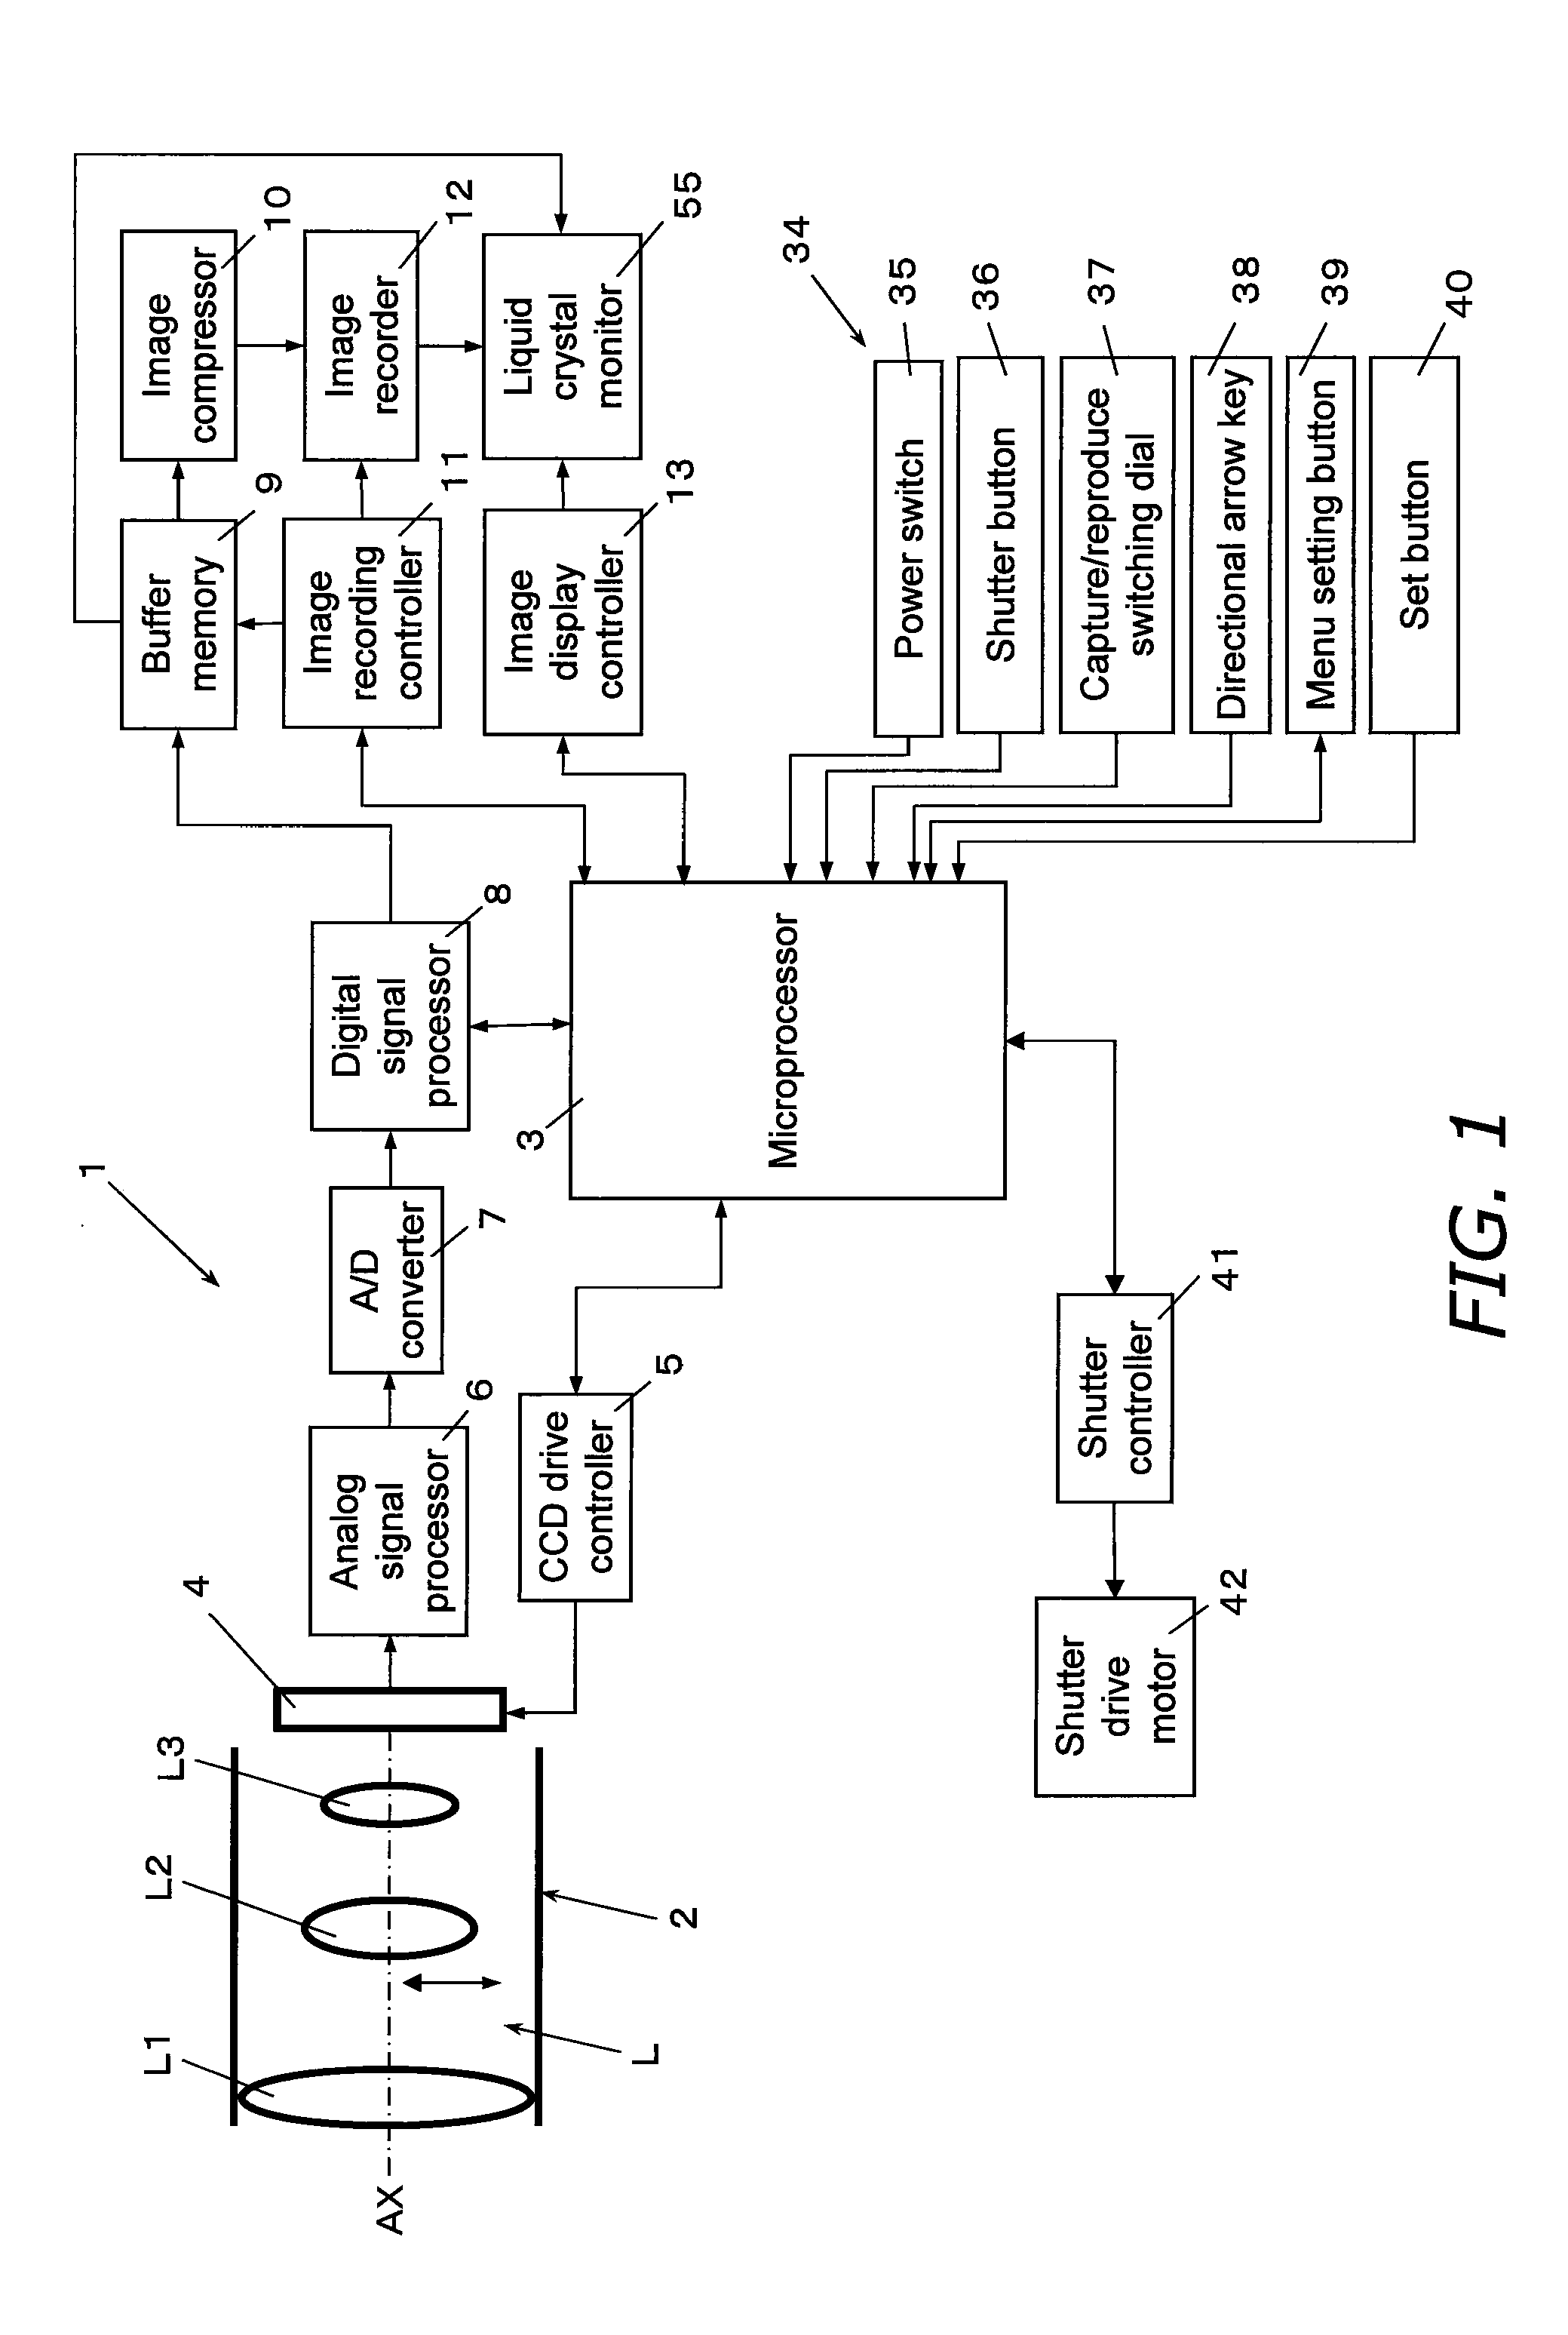 Display control device, imaging device, and printing device